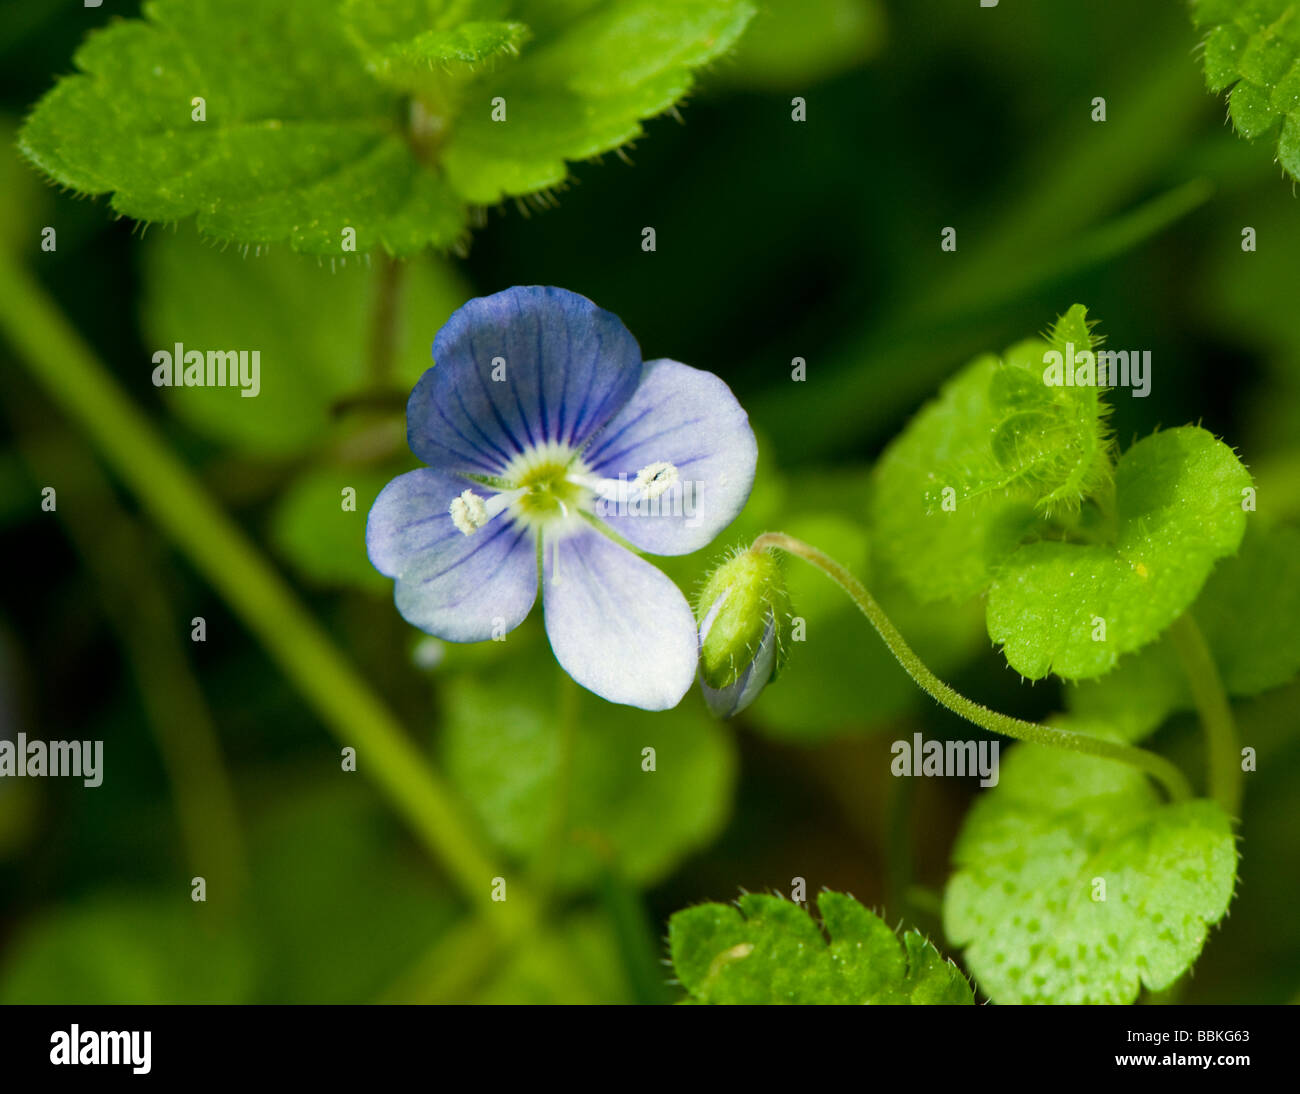 Bud flower and leaves of Round Leaved or Slender Speedwell Veronica filiformis with leaf shoots of Germander Speedwell Stock Photo